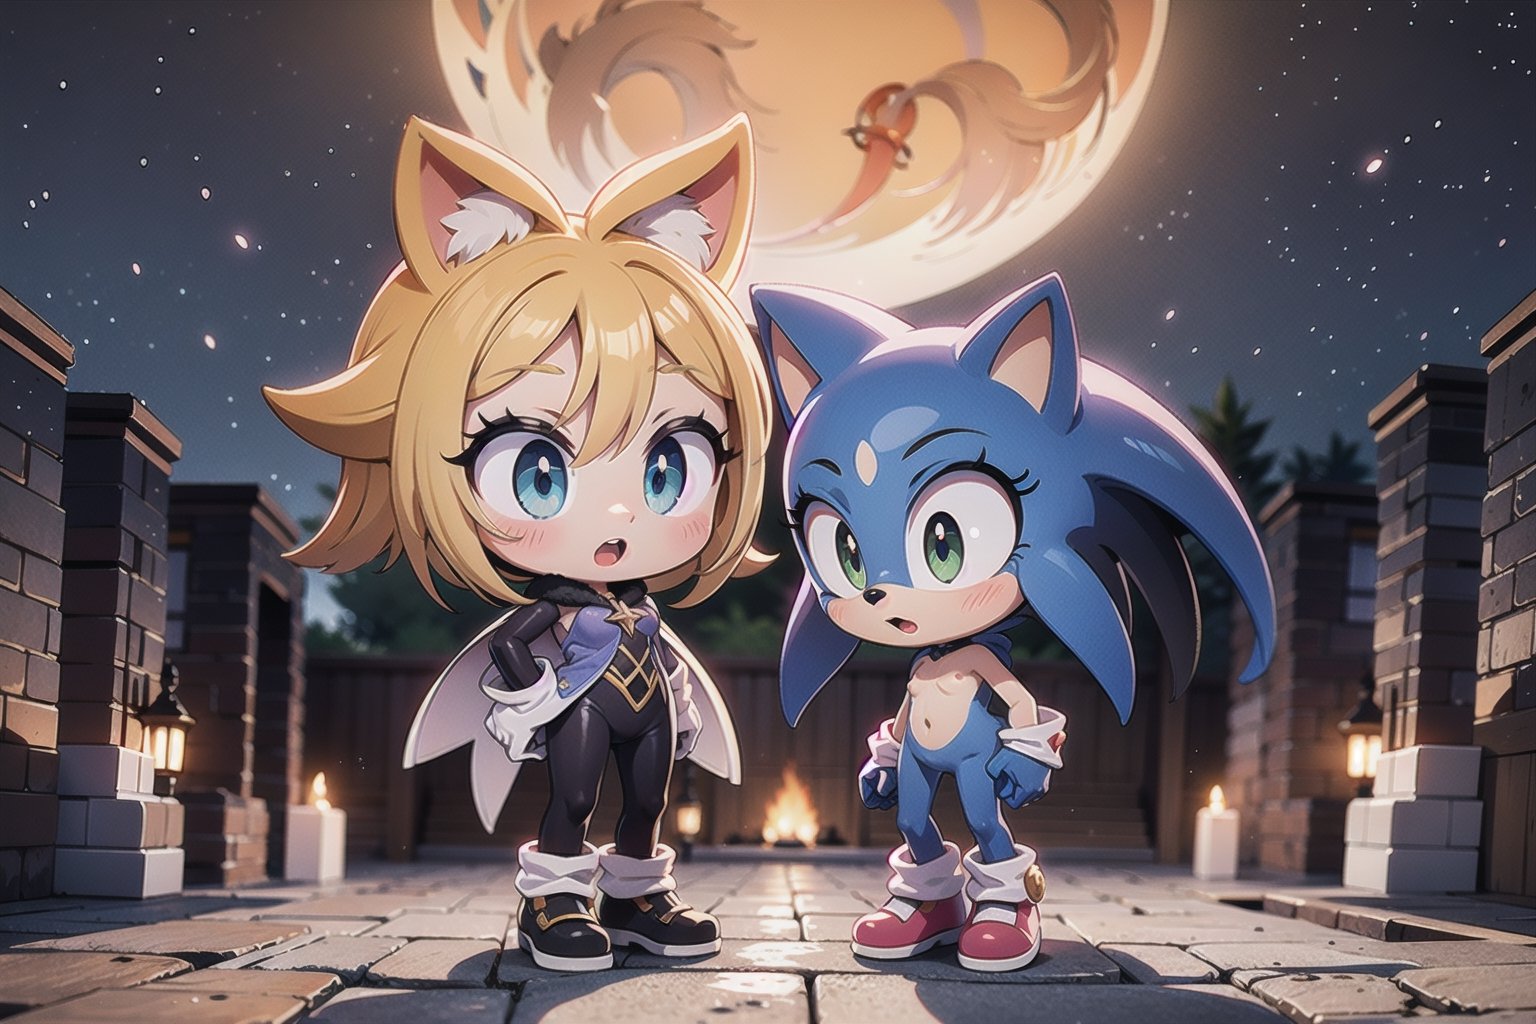 Against the backdrop of the beautiful island of Looney, Monadef and Sonic the Hedgehog stand defiant, their dark silhouettes etched against a orange sky. Sonic the Hedgehog stands by her side, his blue spikes and red shoes a vivid splash against the dull gray stone. Every detail of their forms is rendered in stunning 32K UHD, as if they might step out of the frame at any moment.